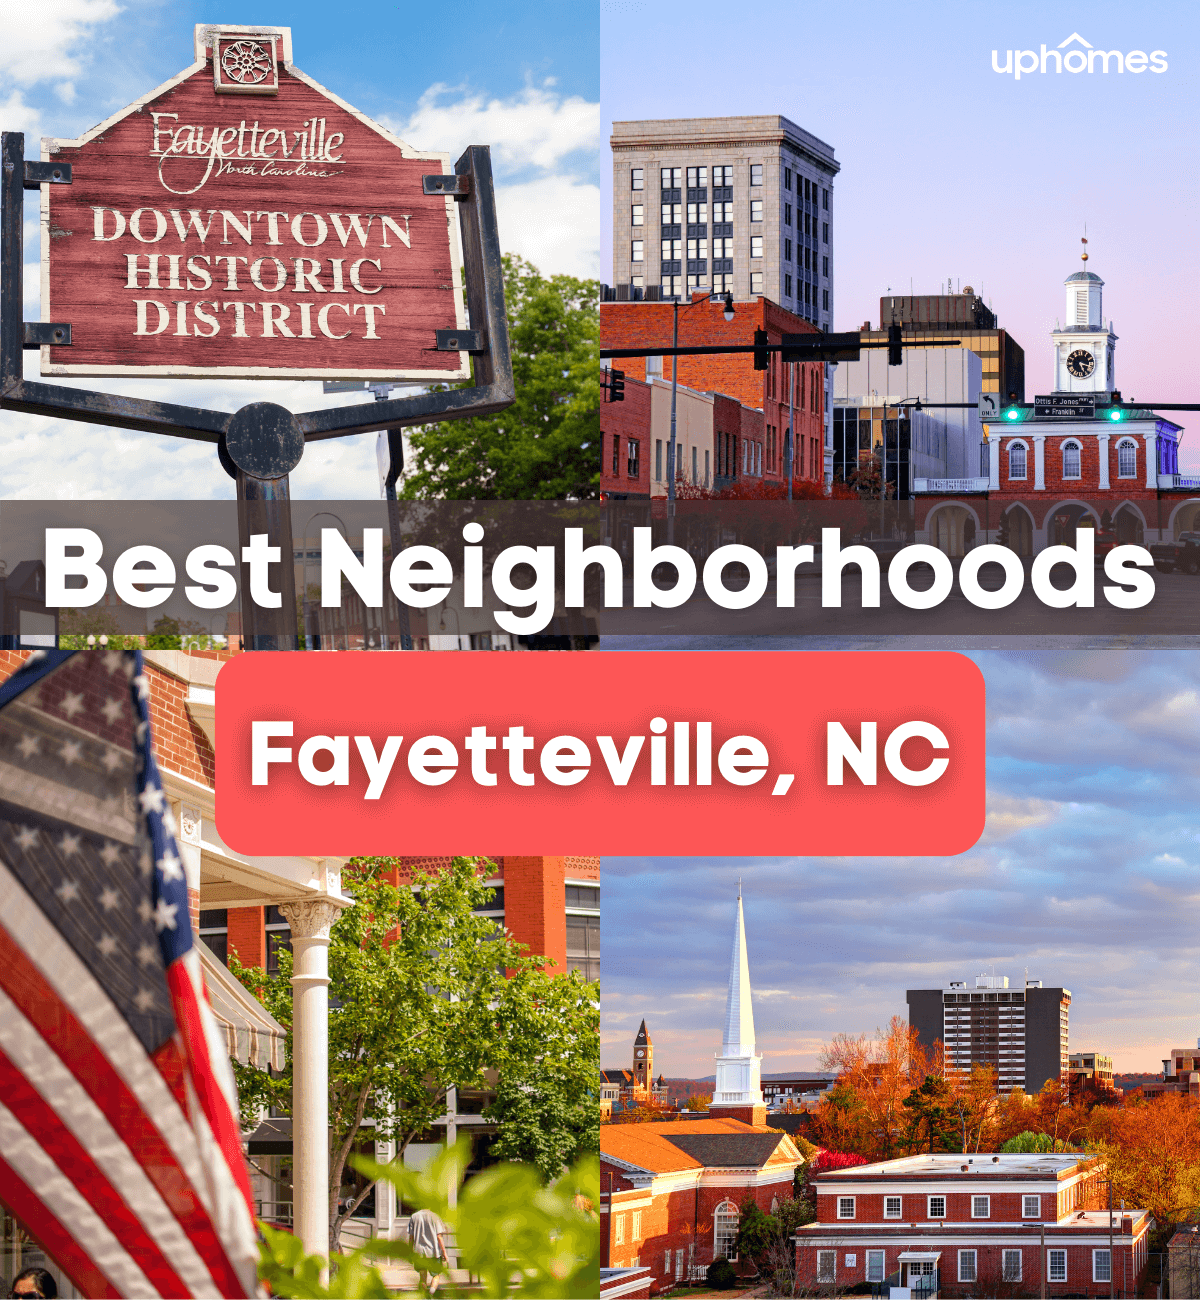 Best Neighborhoods in Fayetteville, NC - What are the best subdivisions in Fayetteville, NC?